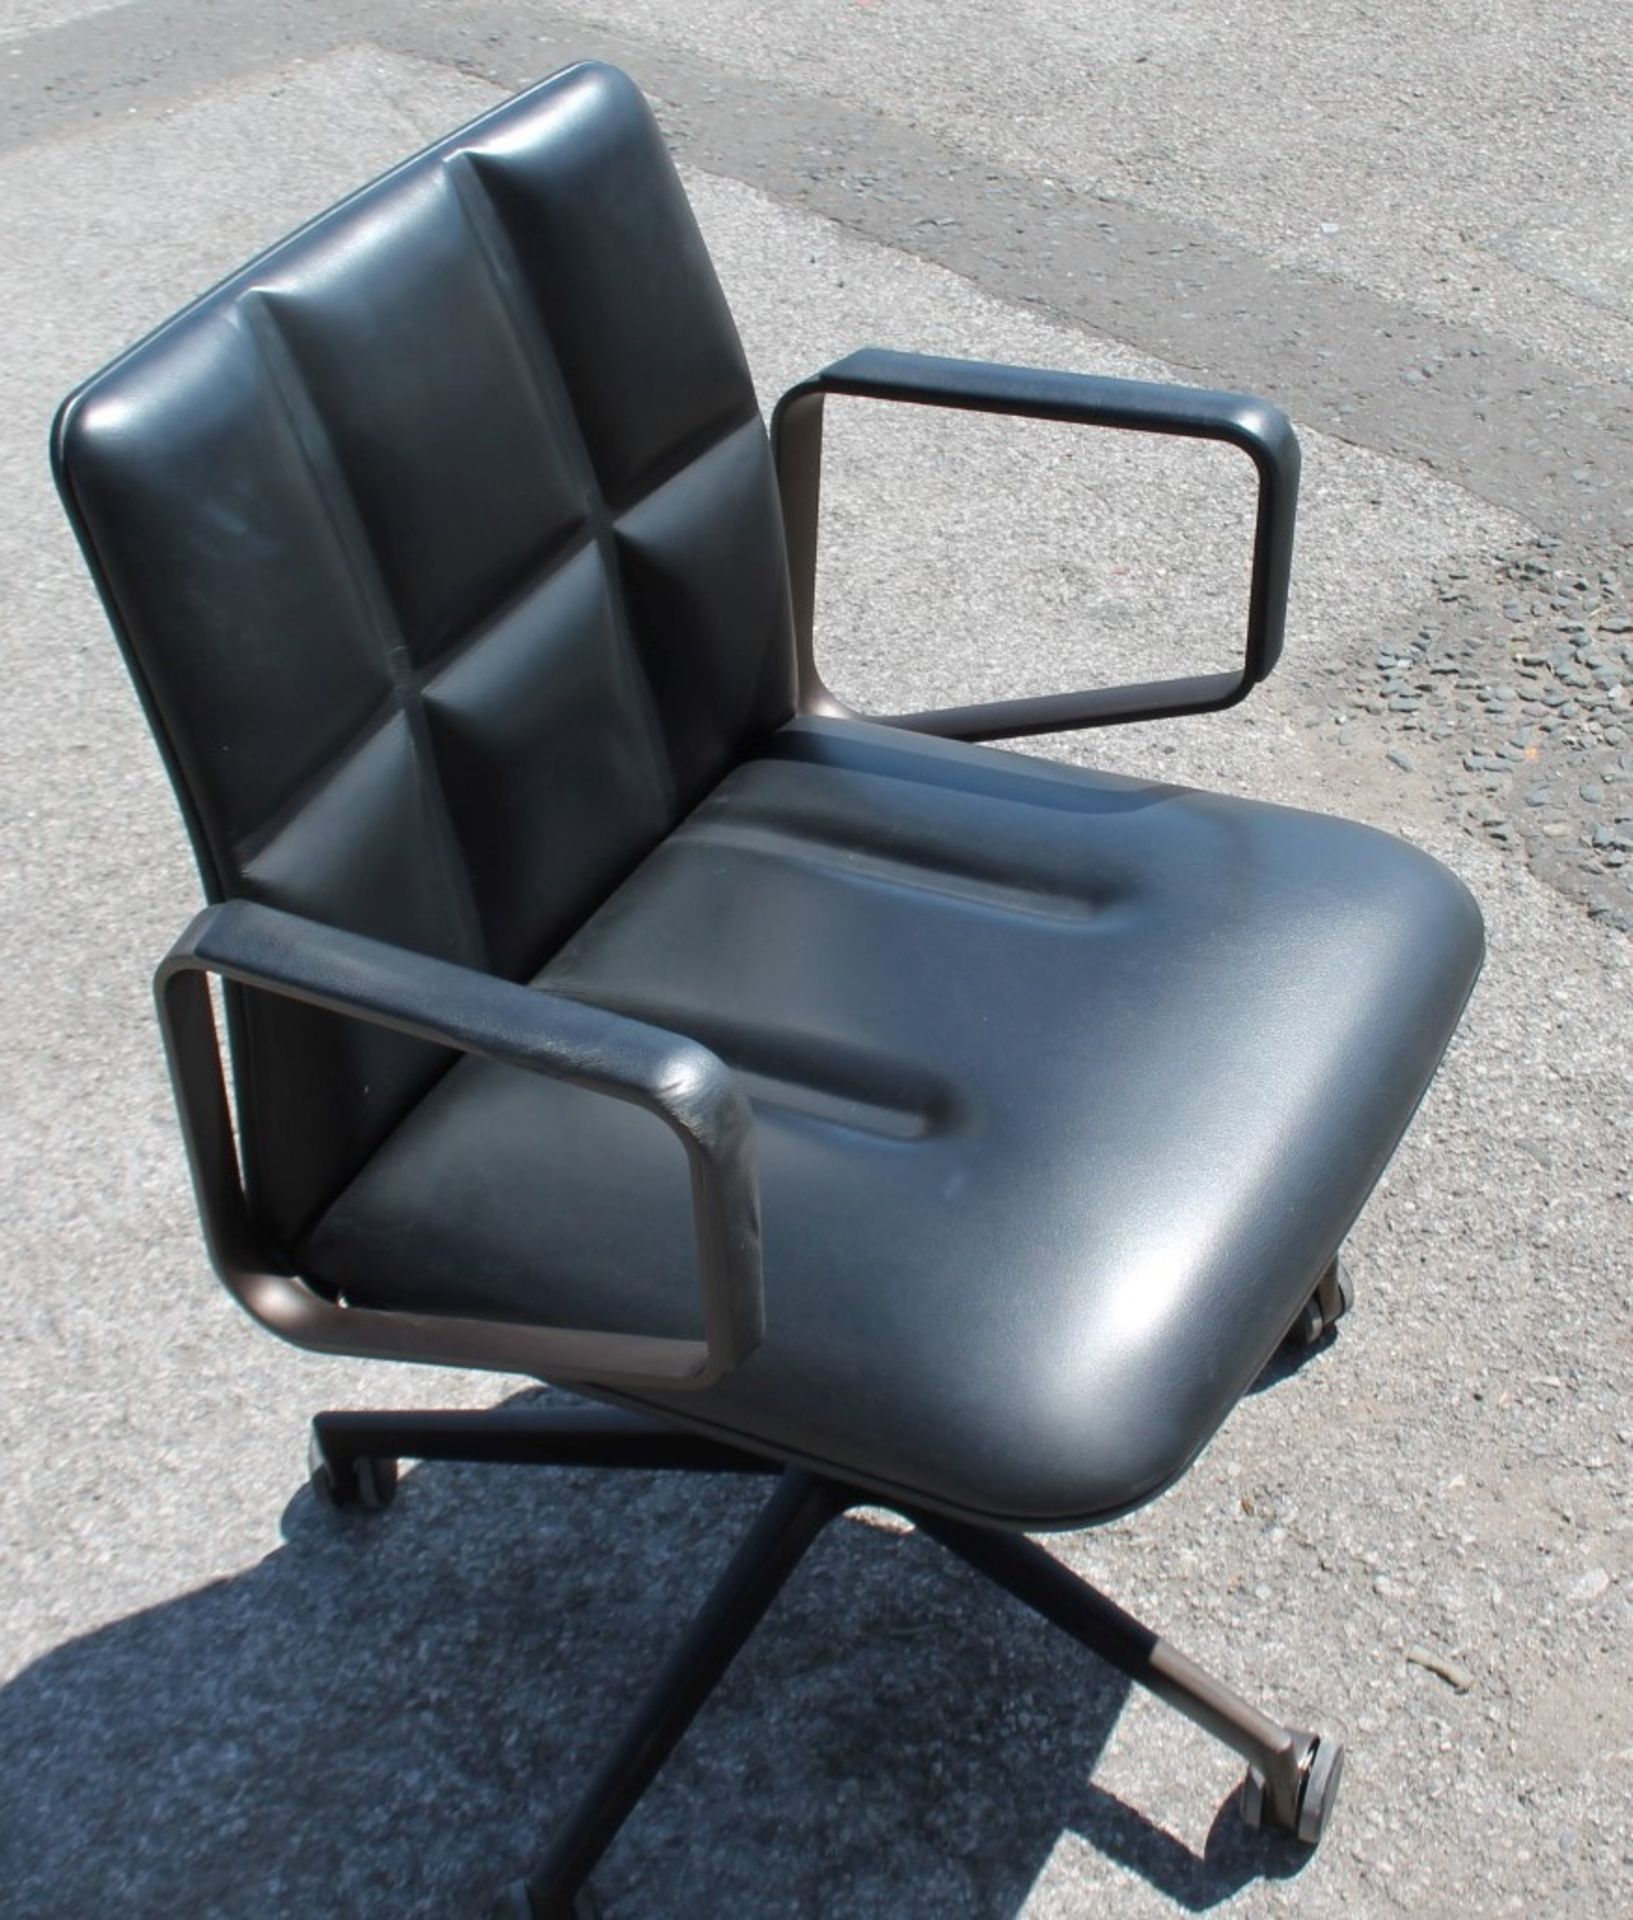 1 x WALTER KNOLL 'Leadchair' Executive Meeting Chair In Genuine Leather - Original RRP £4,250 - Image 9 of 9